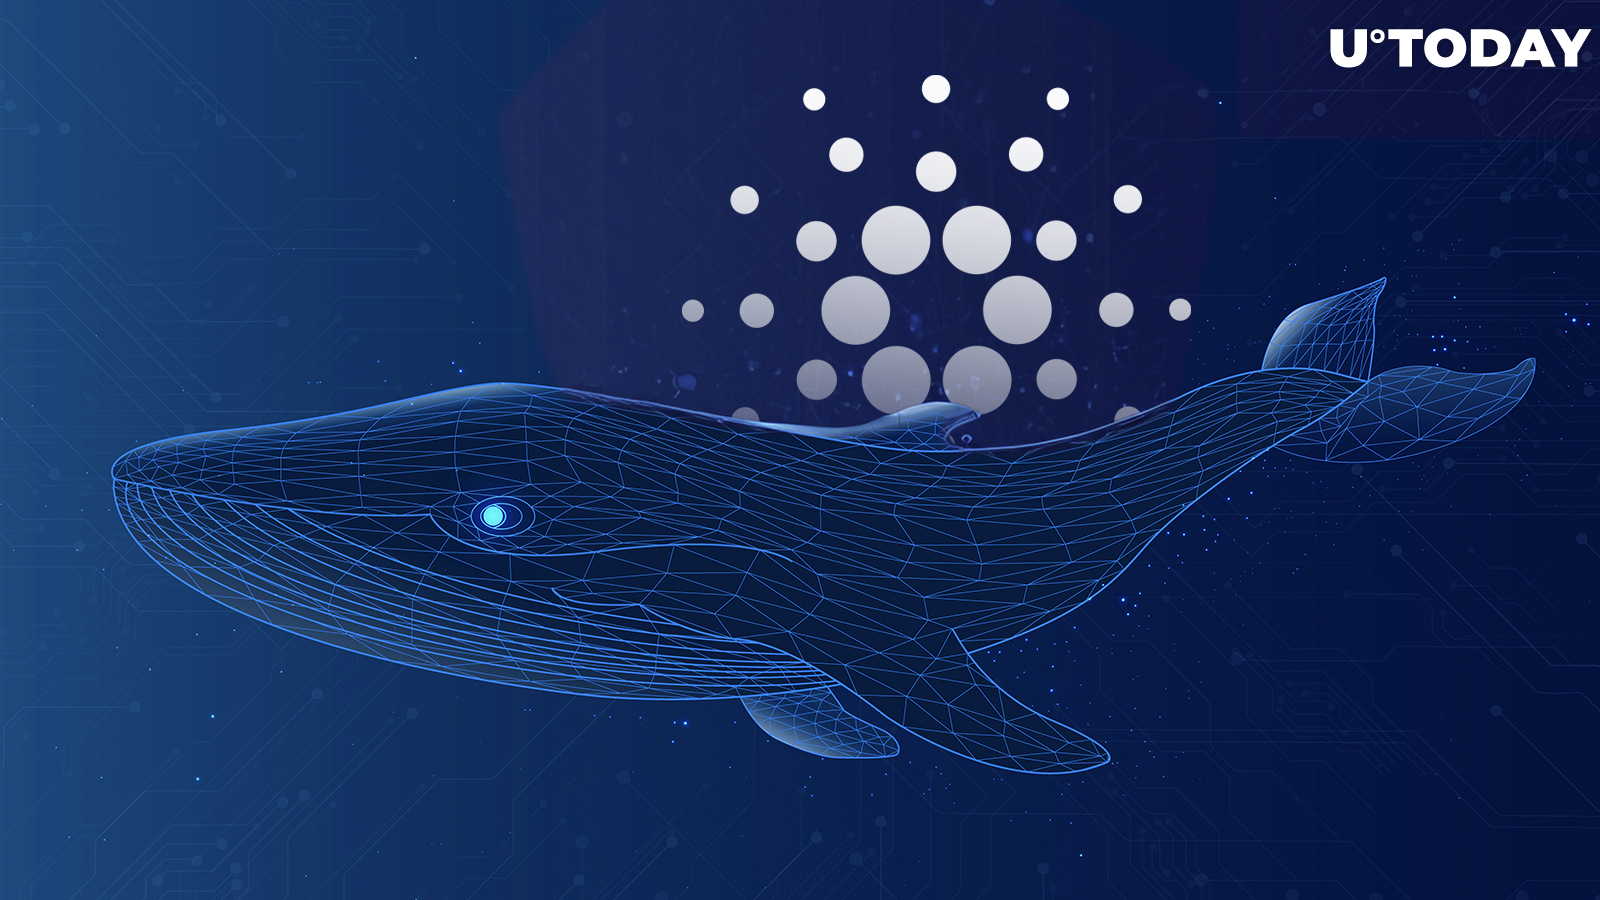 Cardano Whales Dump 1 Billion Tokens, What's Next for ADA Price?